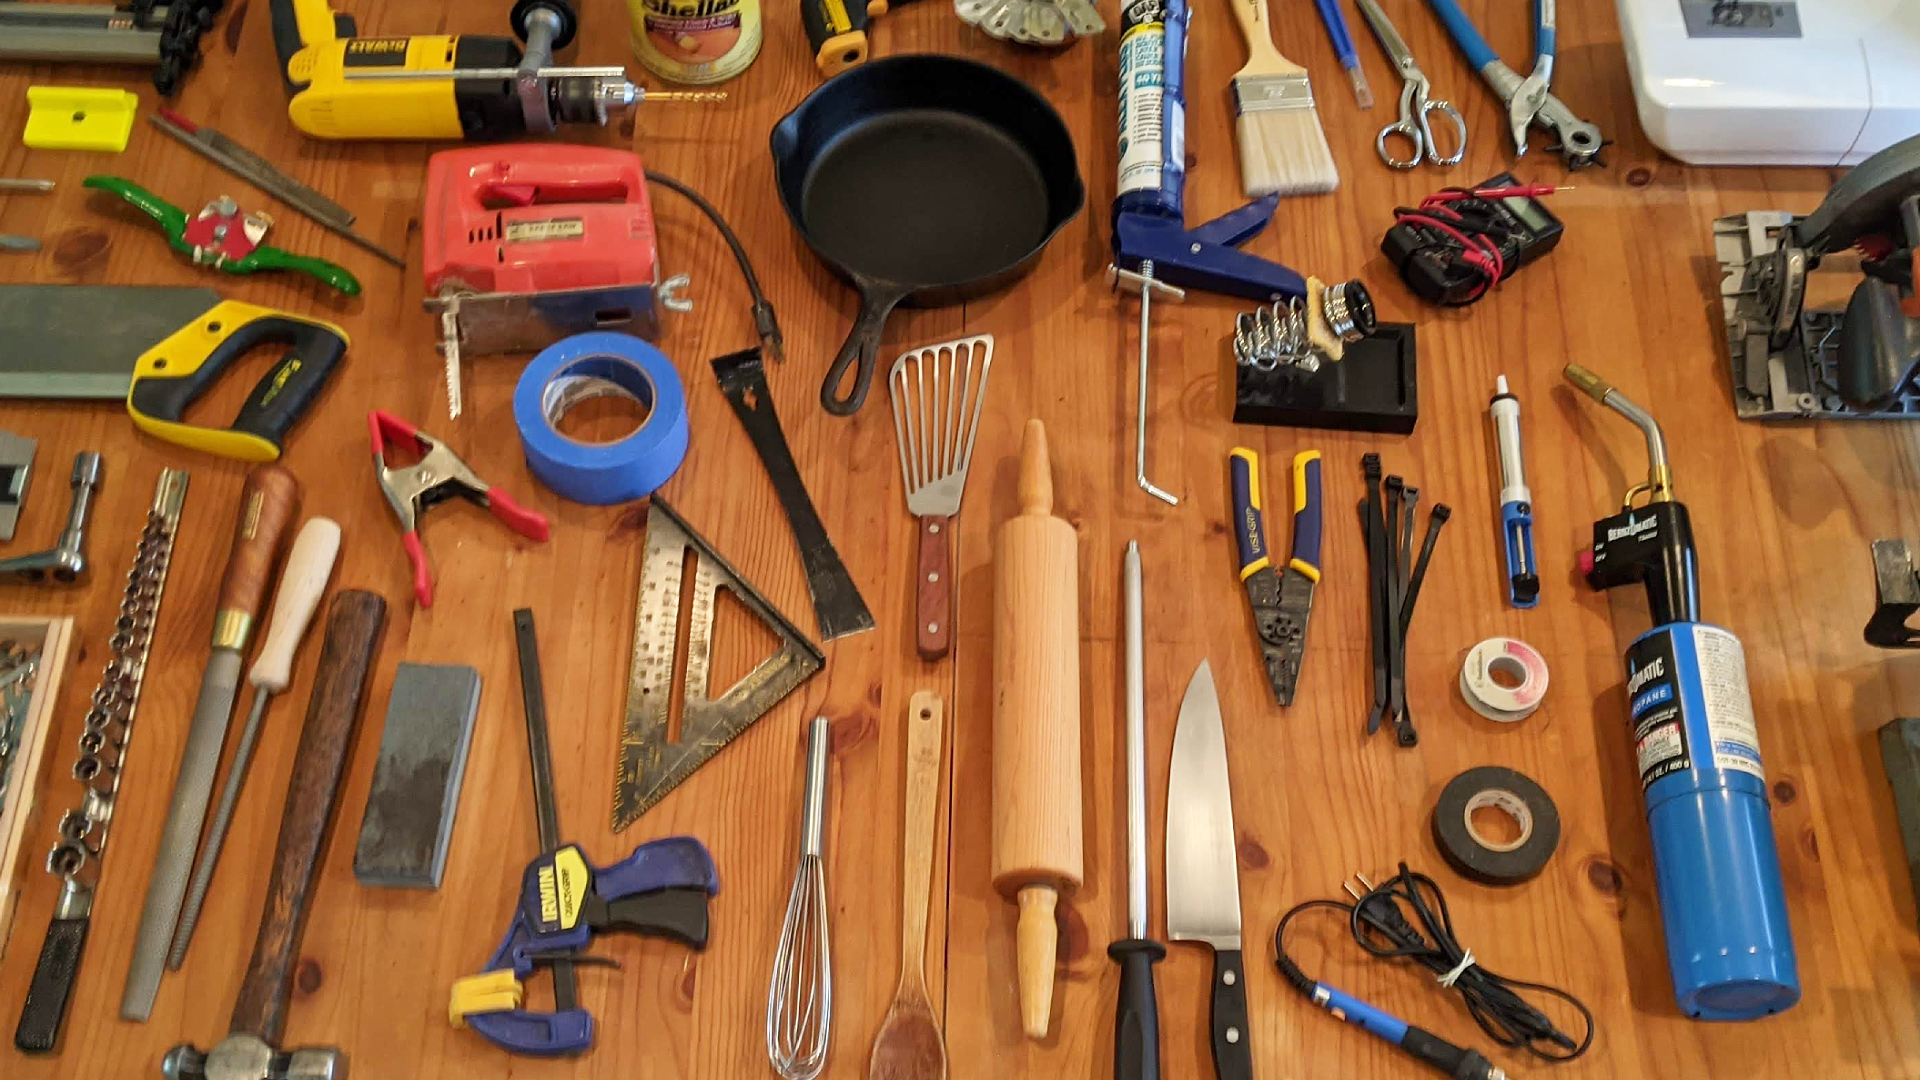 A layout of tools of all makes and uses